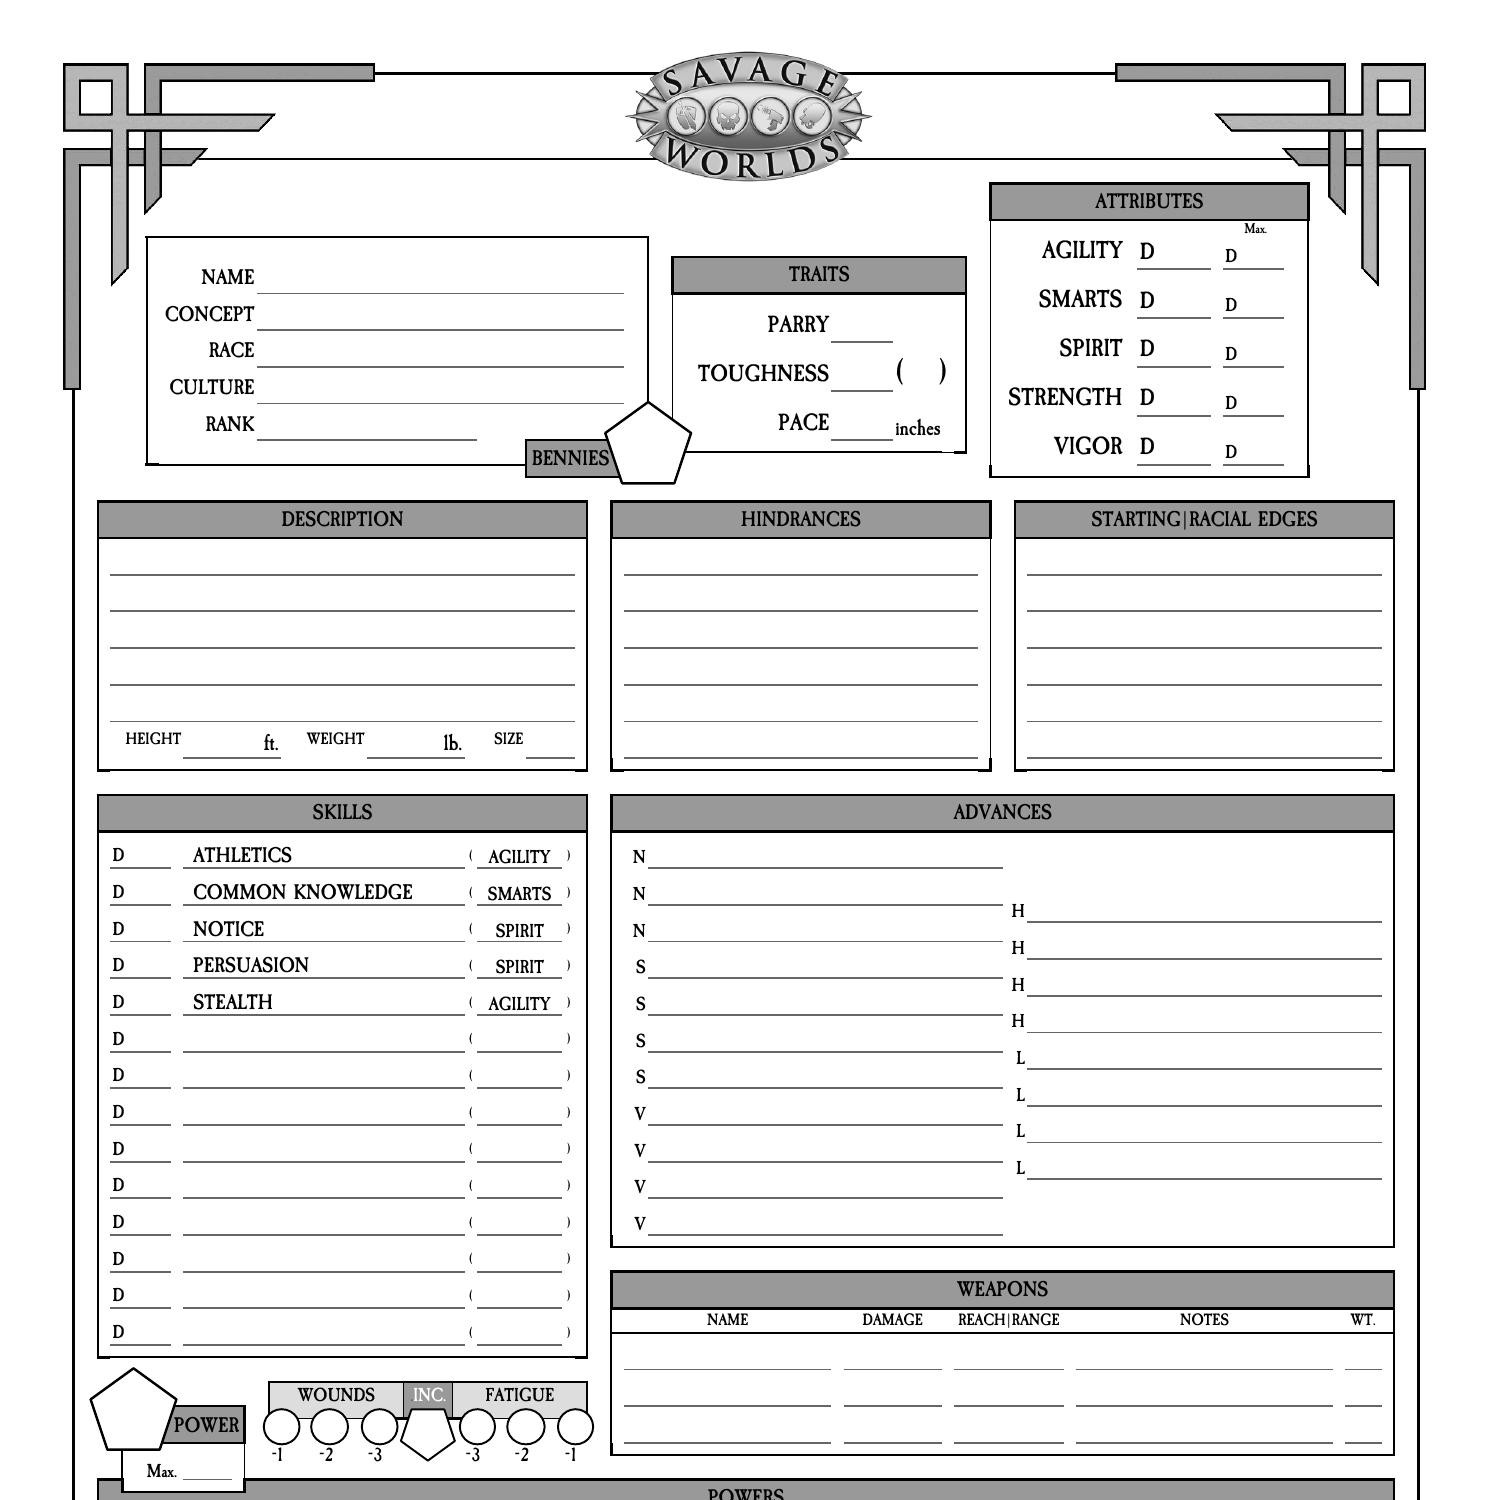 Character Sheet.pdf | DocDroid